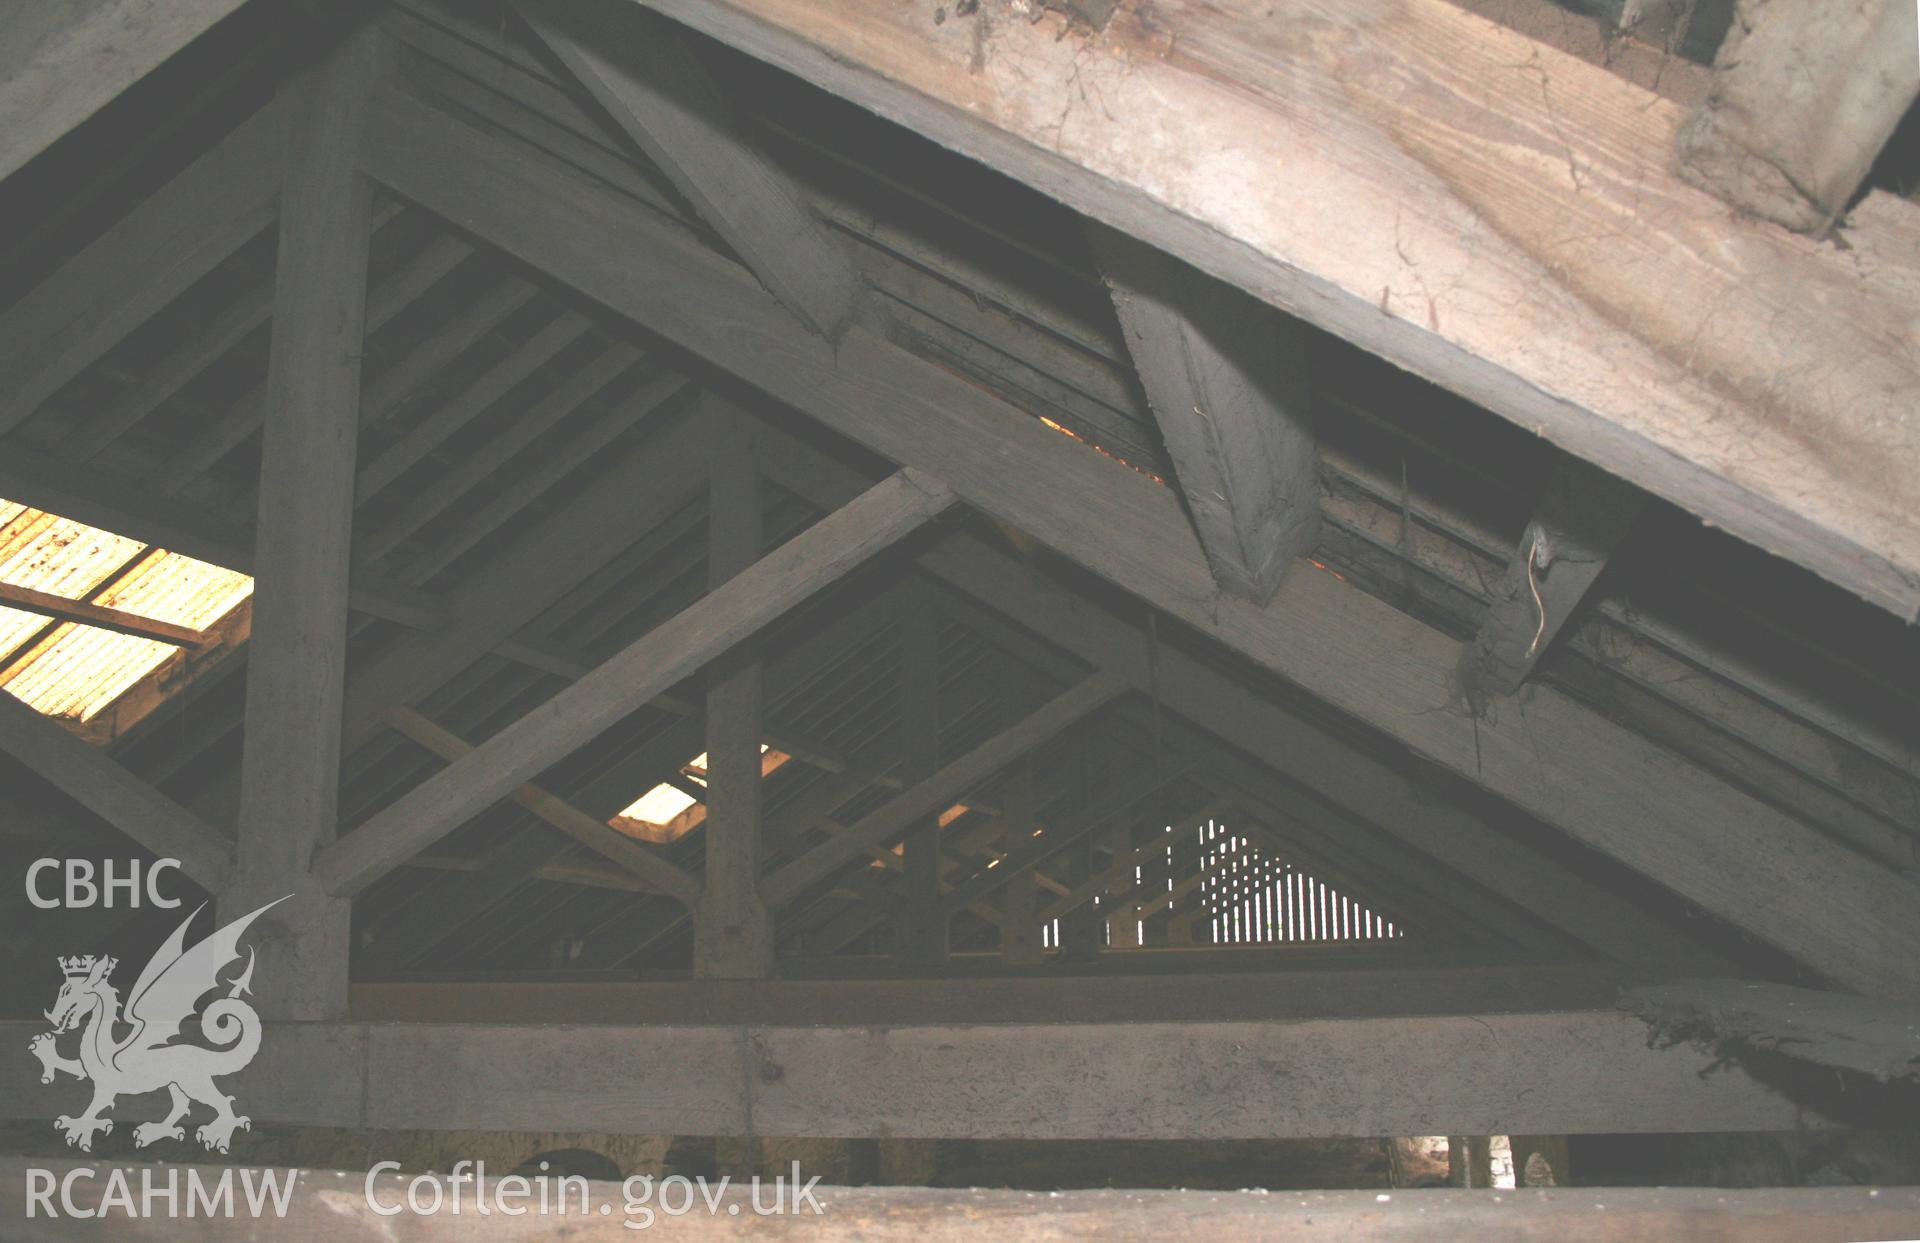 Interior view showing wooden roof beams and joists. Photographic survey of the threshing house, straw house, mixing house and root house at Tan-y-Graig Farm, Llanfarian, conducted by Geoff Ward and John Wiles, 11th December 2006.